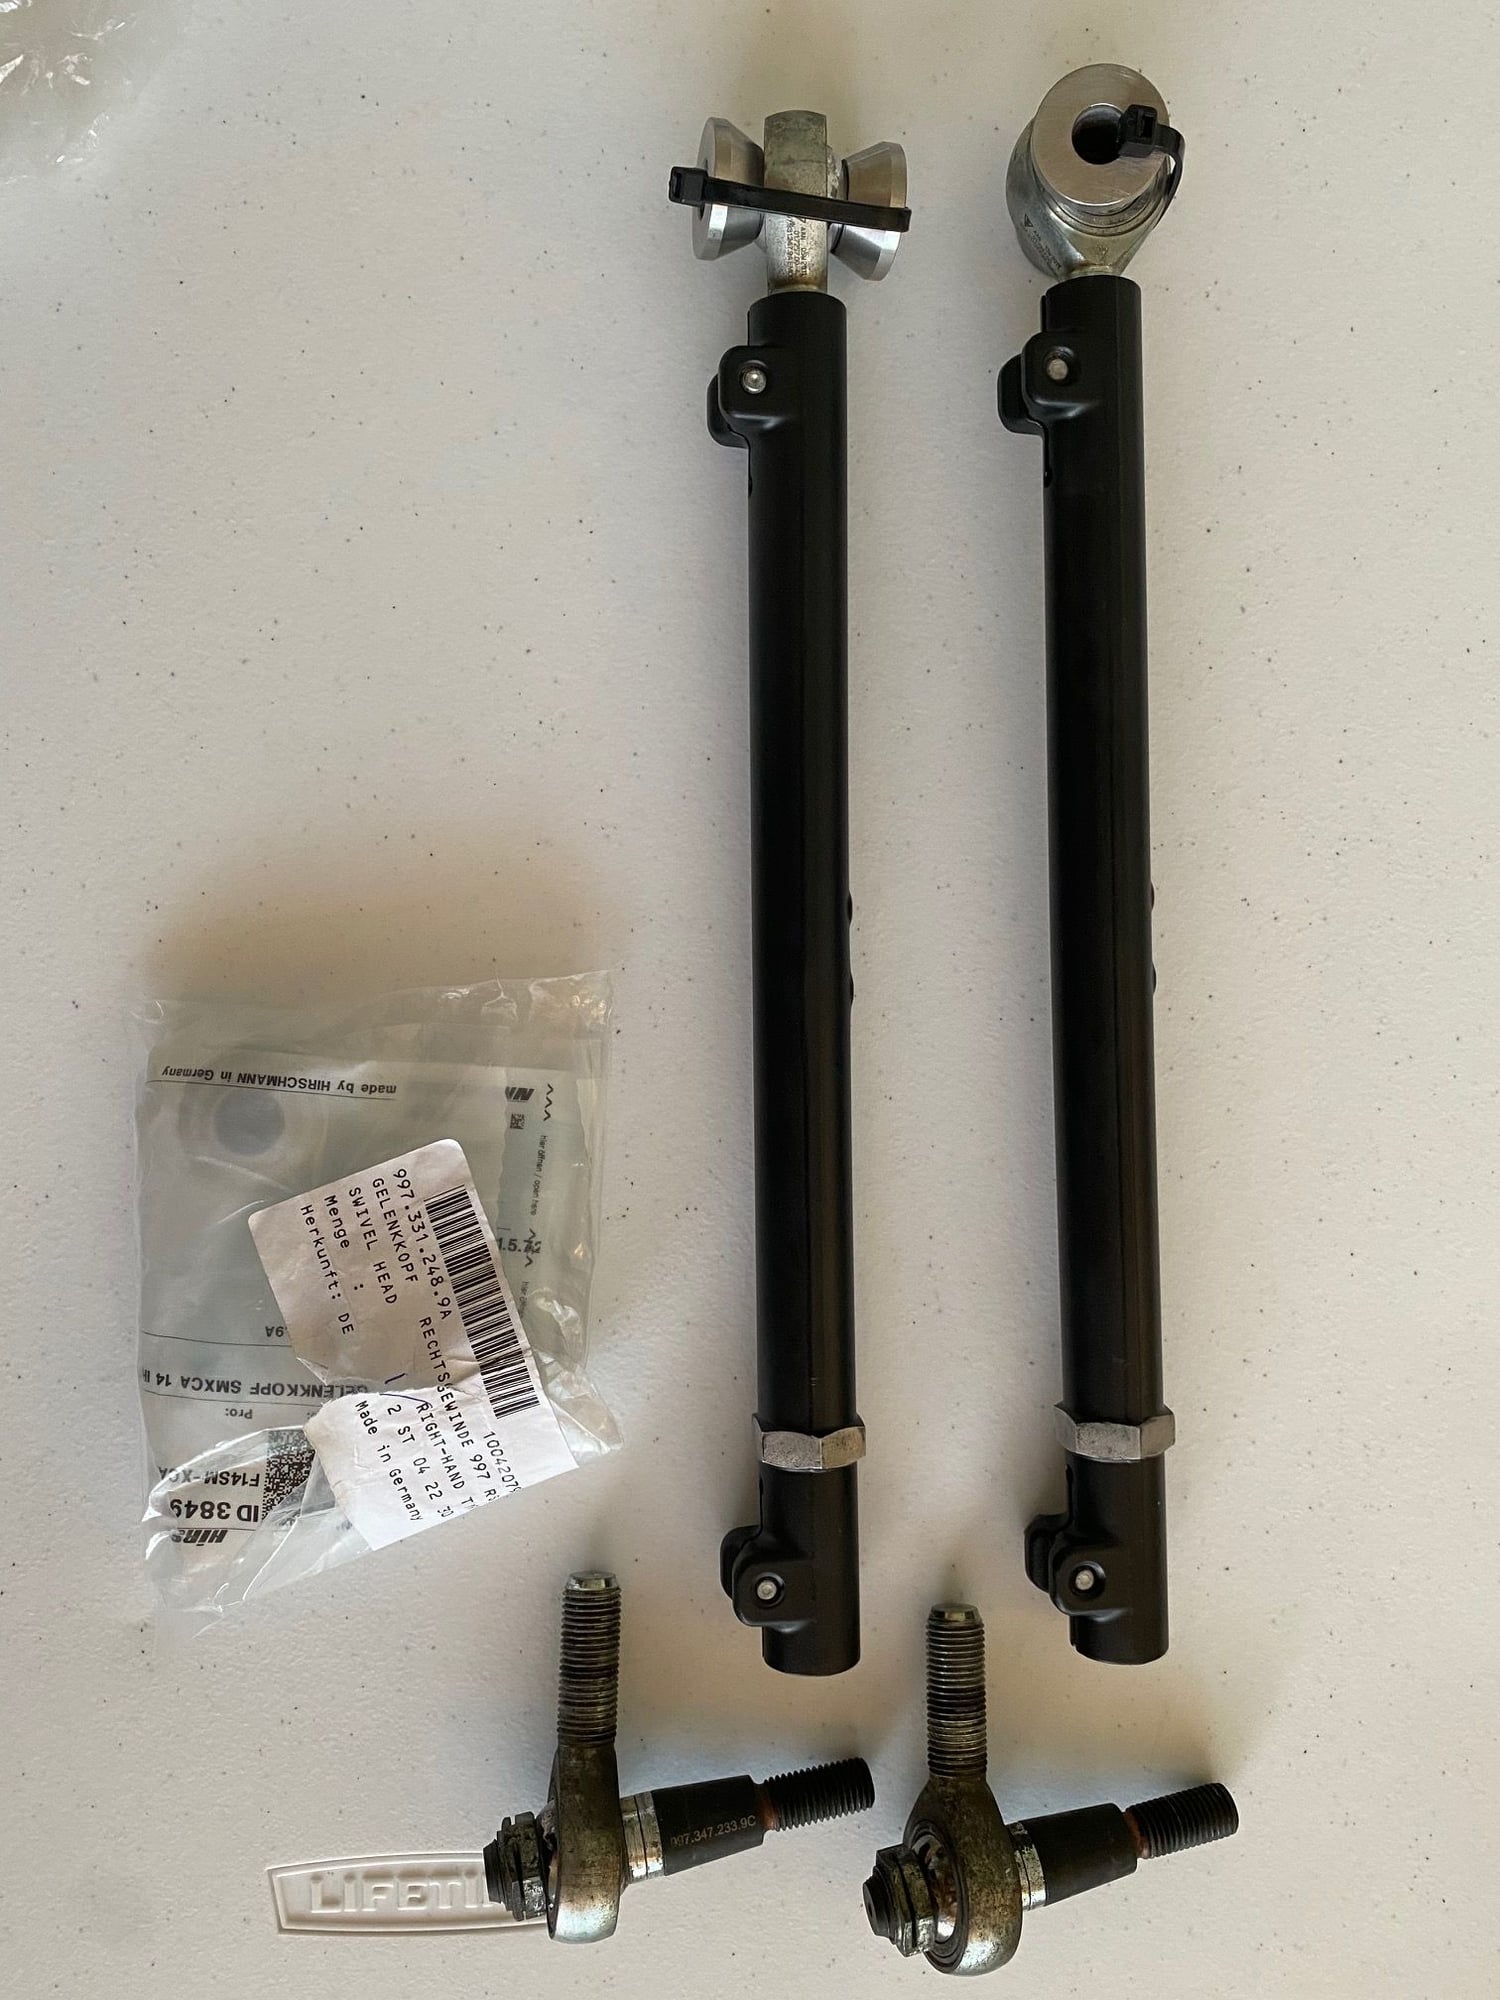 Steering/Suspension - PMNA 997 GT3 Cup front and rear toe arms - New - Redwood City, CA 94065, United States